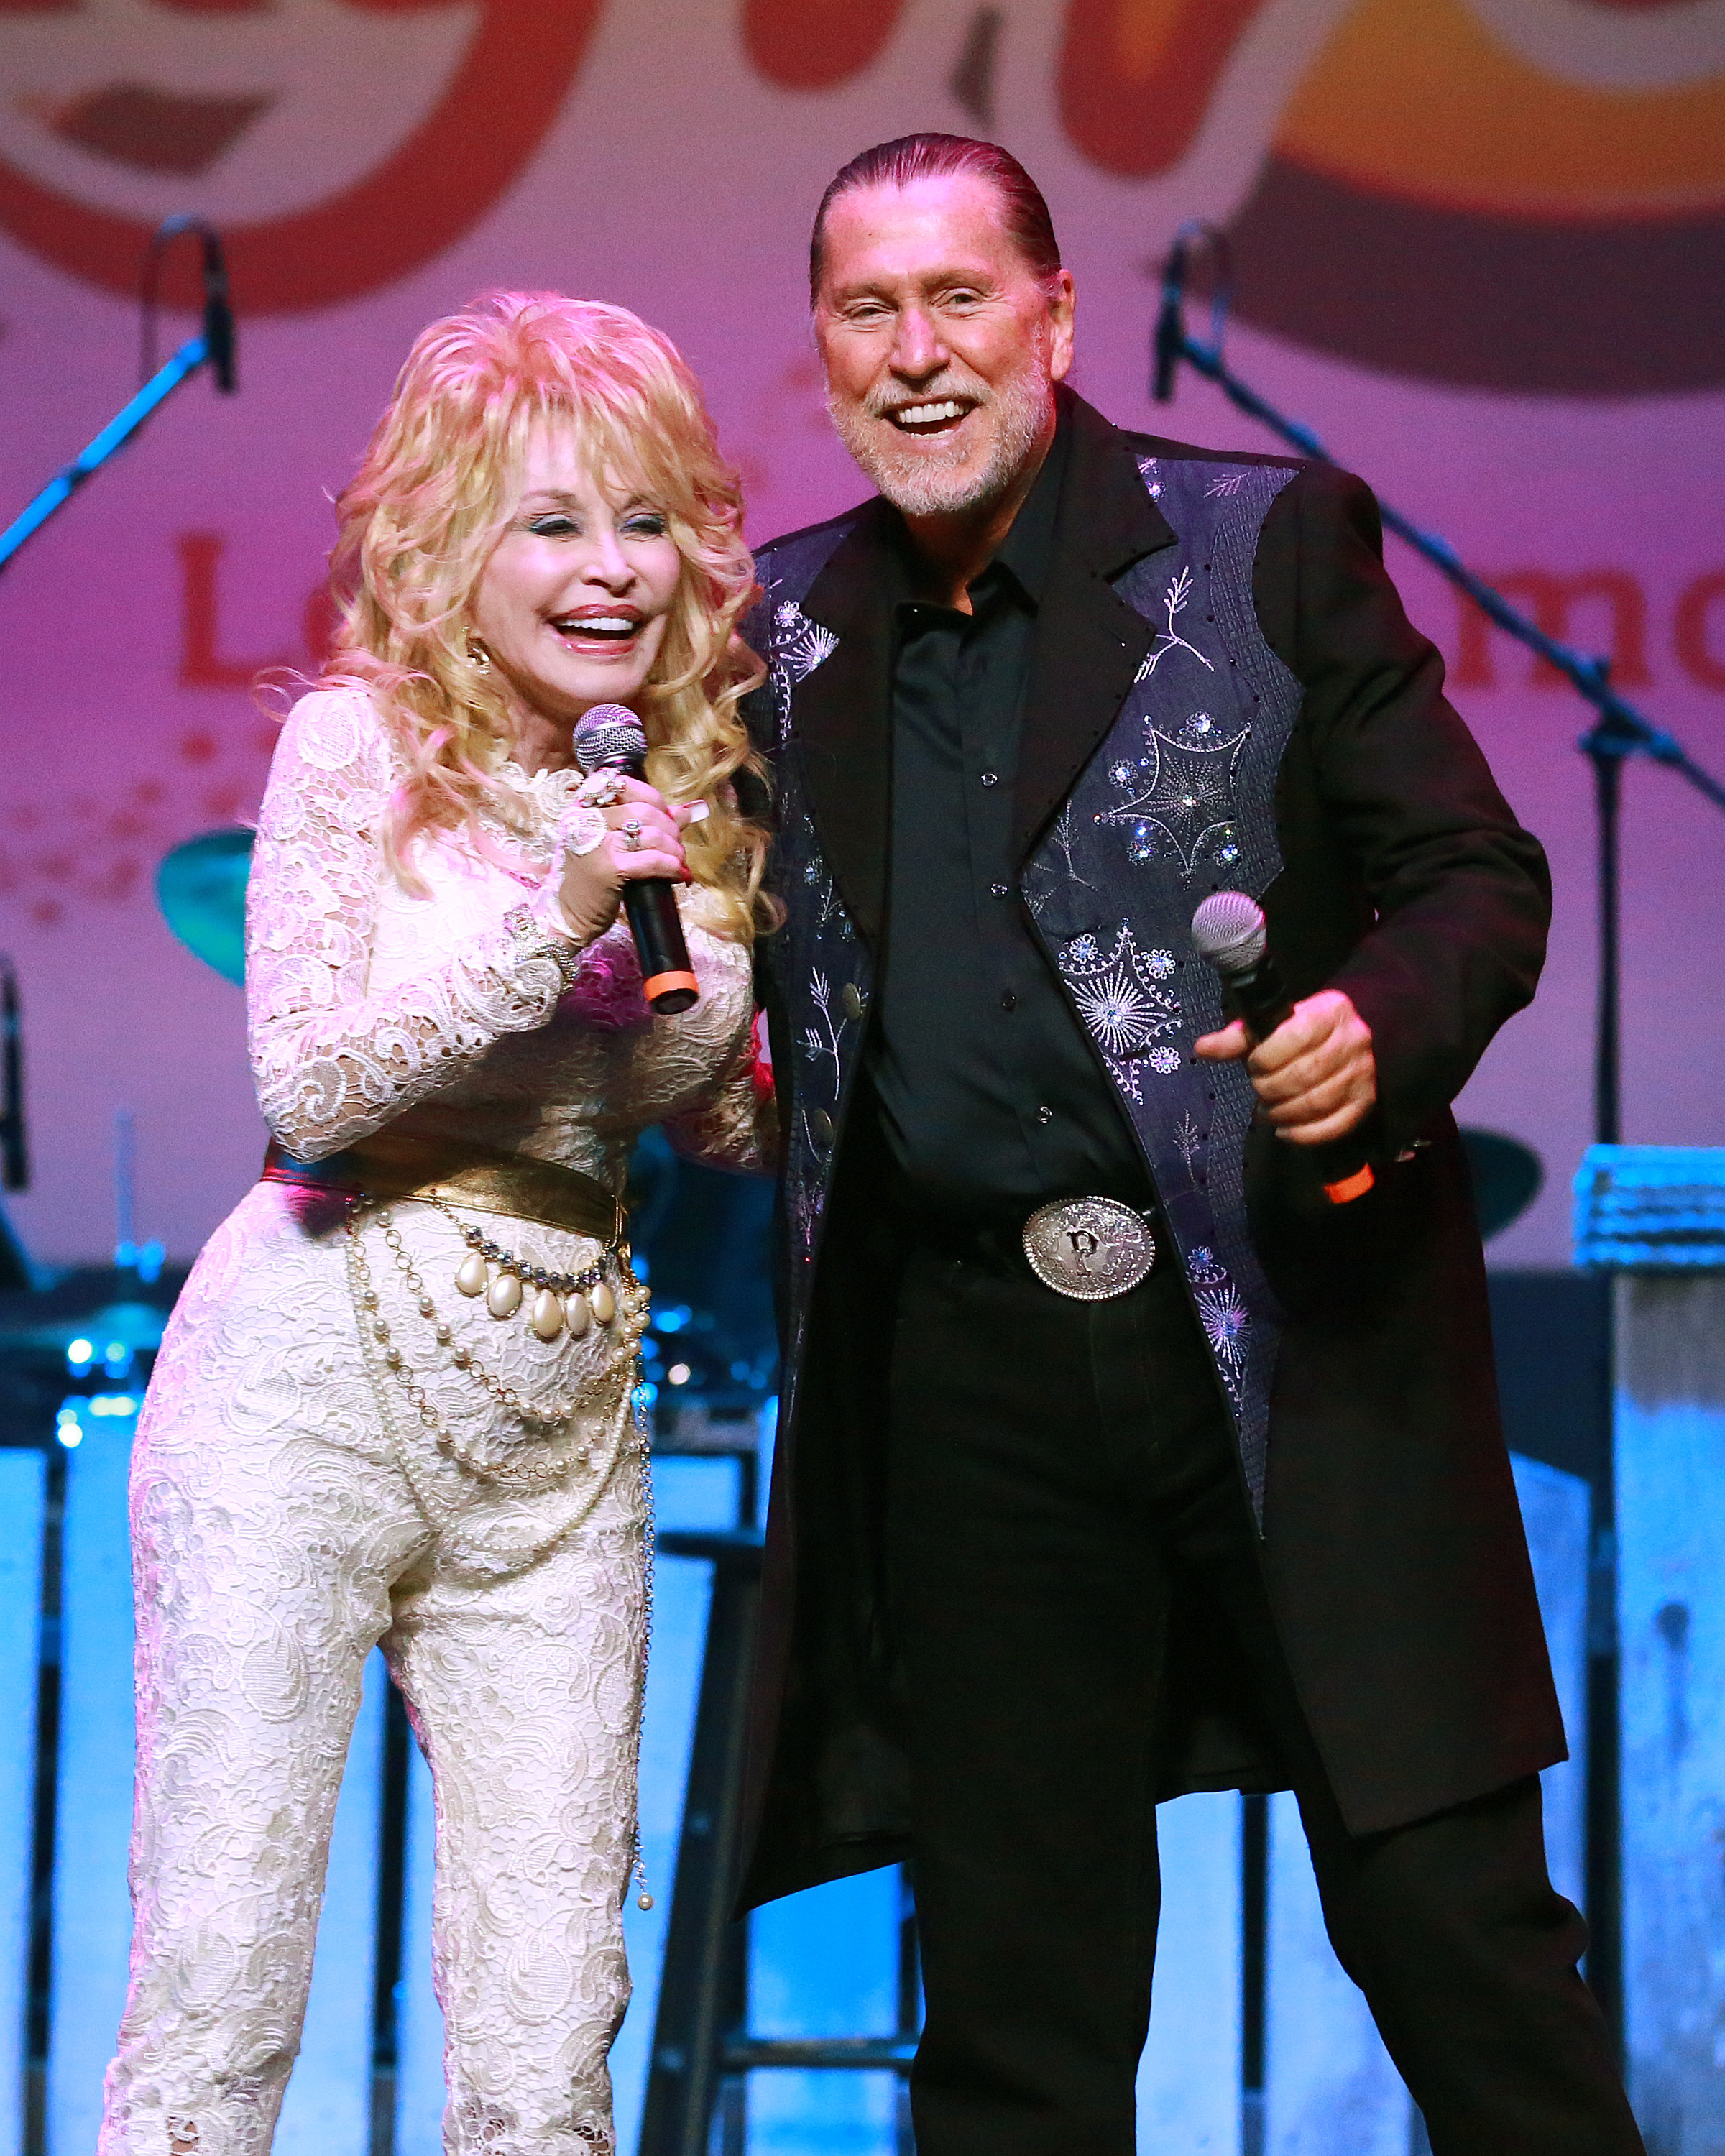 A picture of Dolly and Randy Parton singing together on stage with beautiful smiles on their faces.